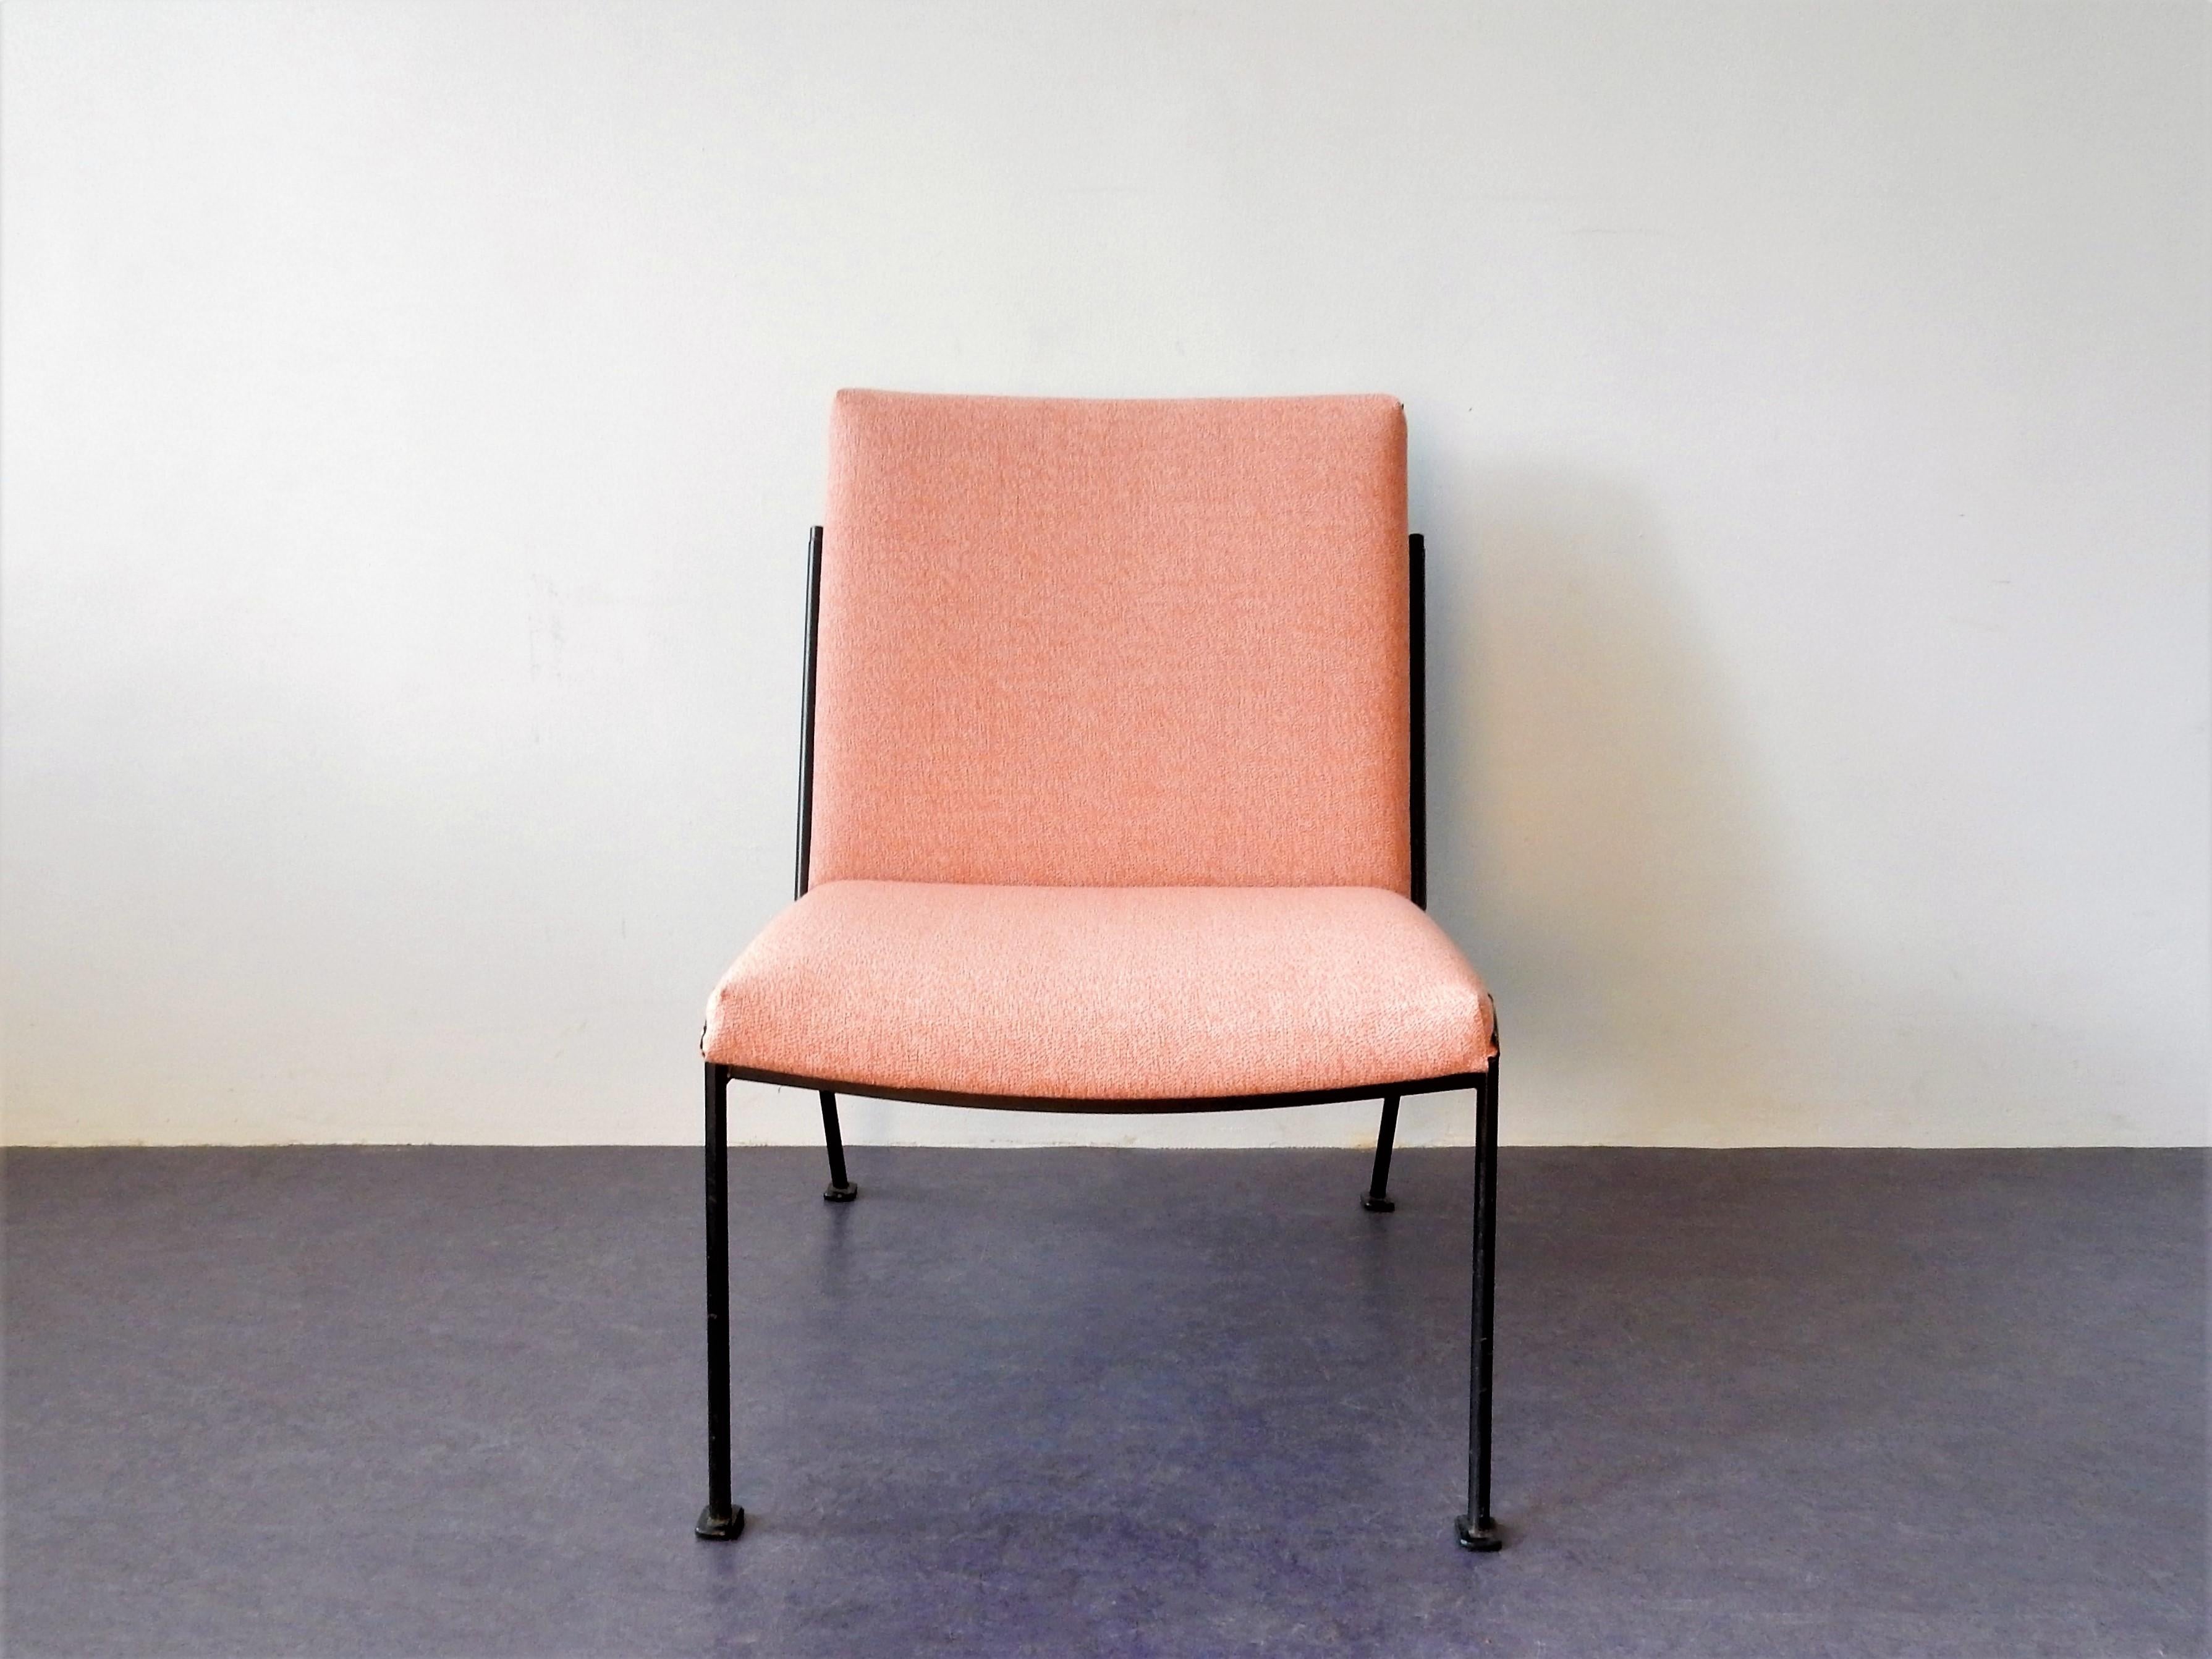 The Oase lounge chair was designed by Wim Rietveld for Ahrend de Cirkel in 1958, and gained the Signe d'Or price in 1959. A beautiful piece of Dutch design! This chair is newly upholstered and has new foam. This version without armrests is a more